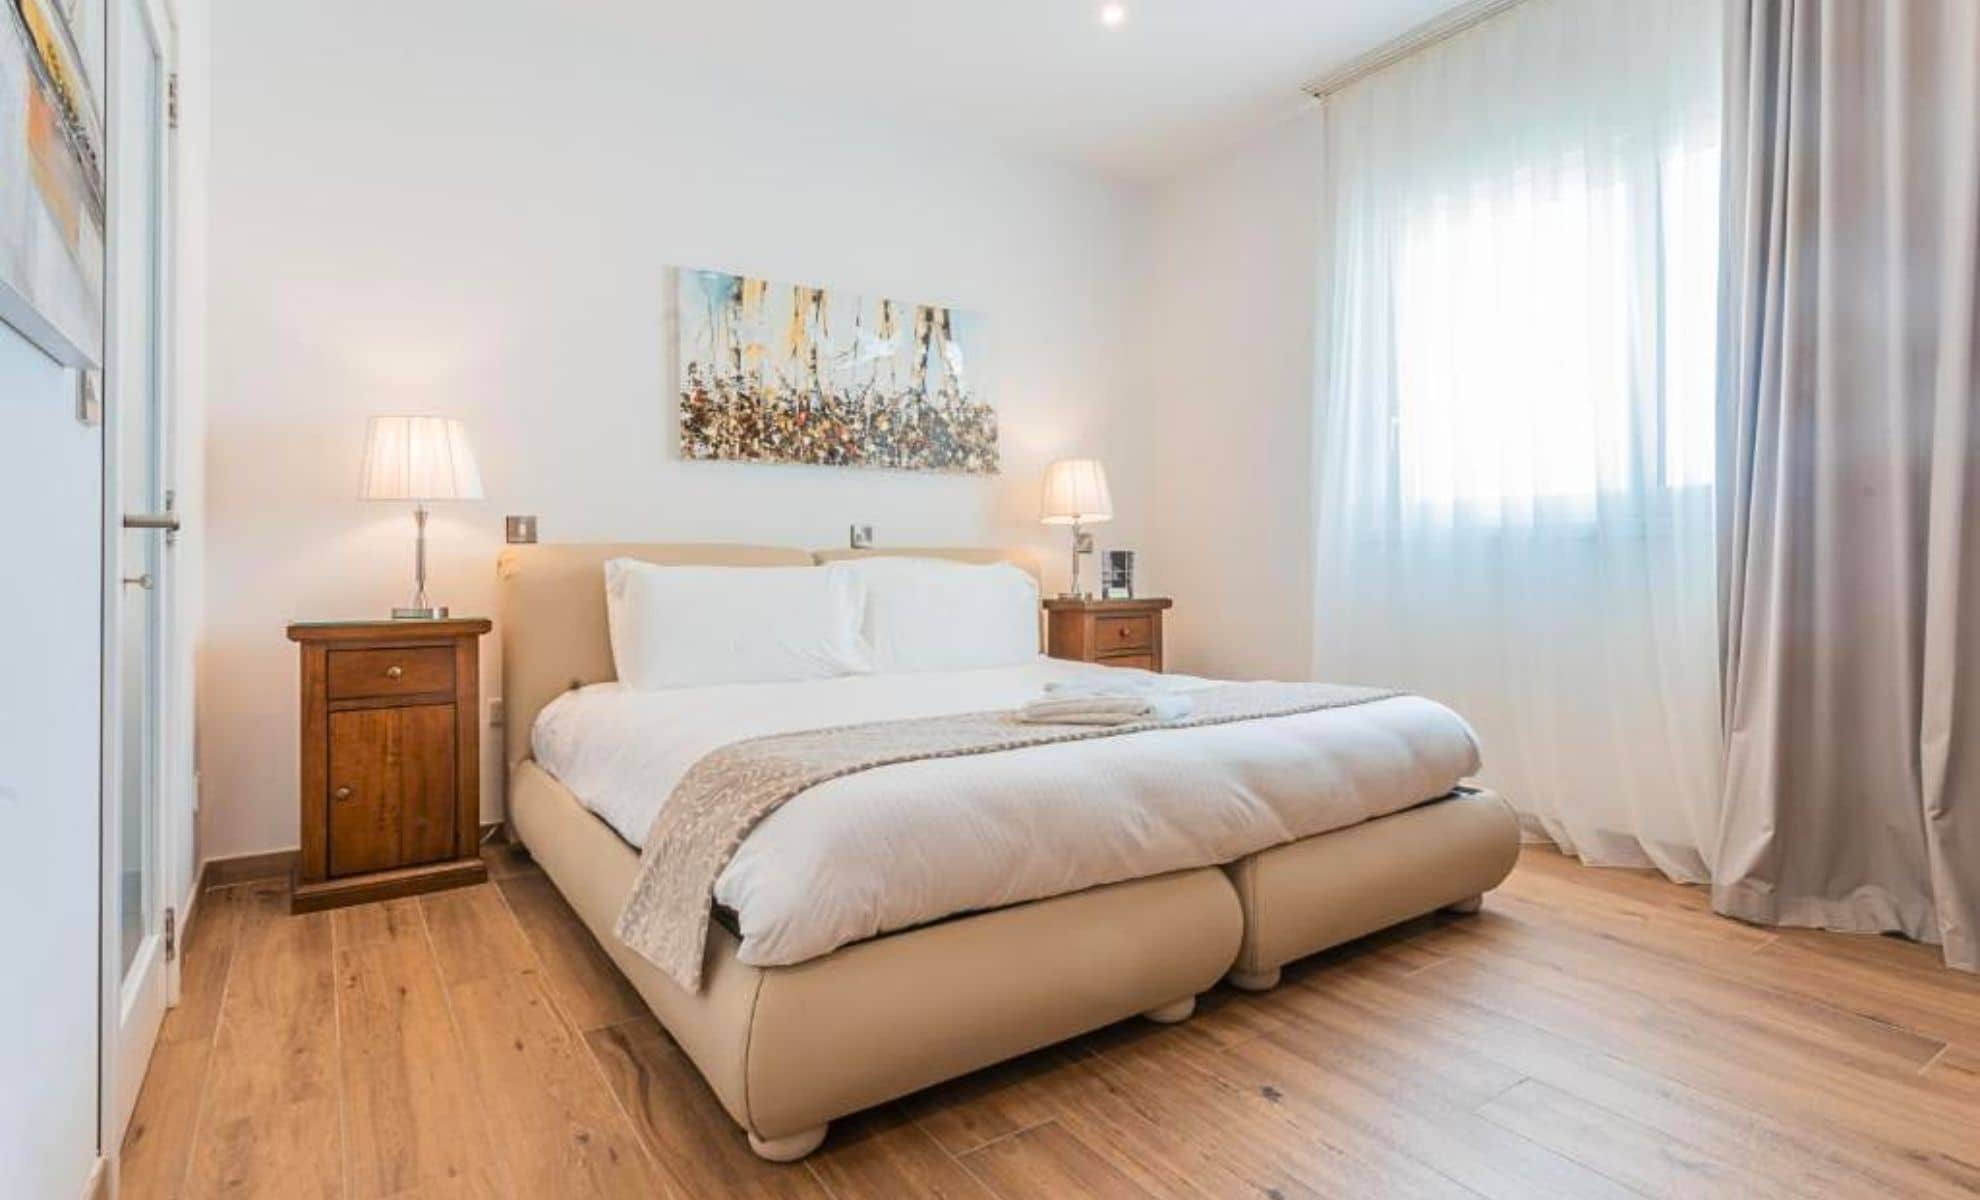 Le Bed and Breakfast Violetta Boutique , Barcelone